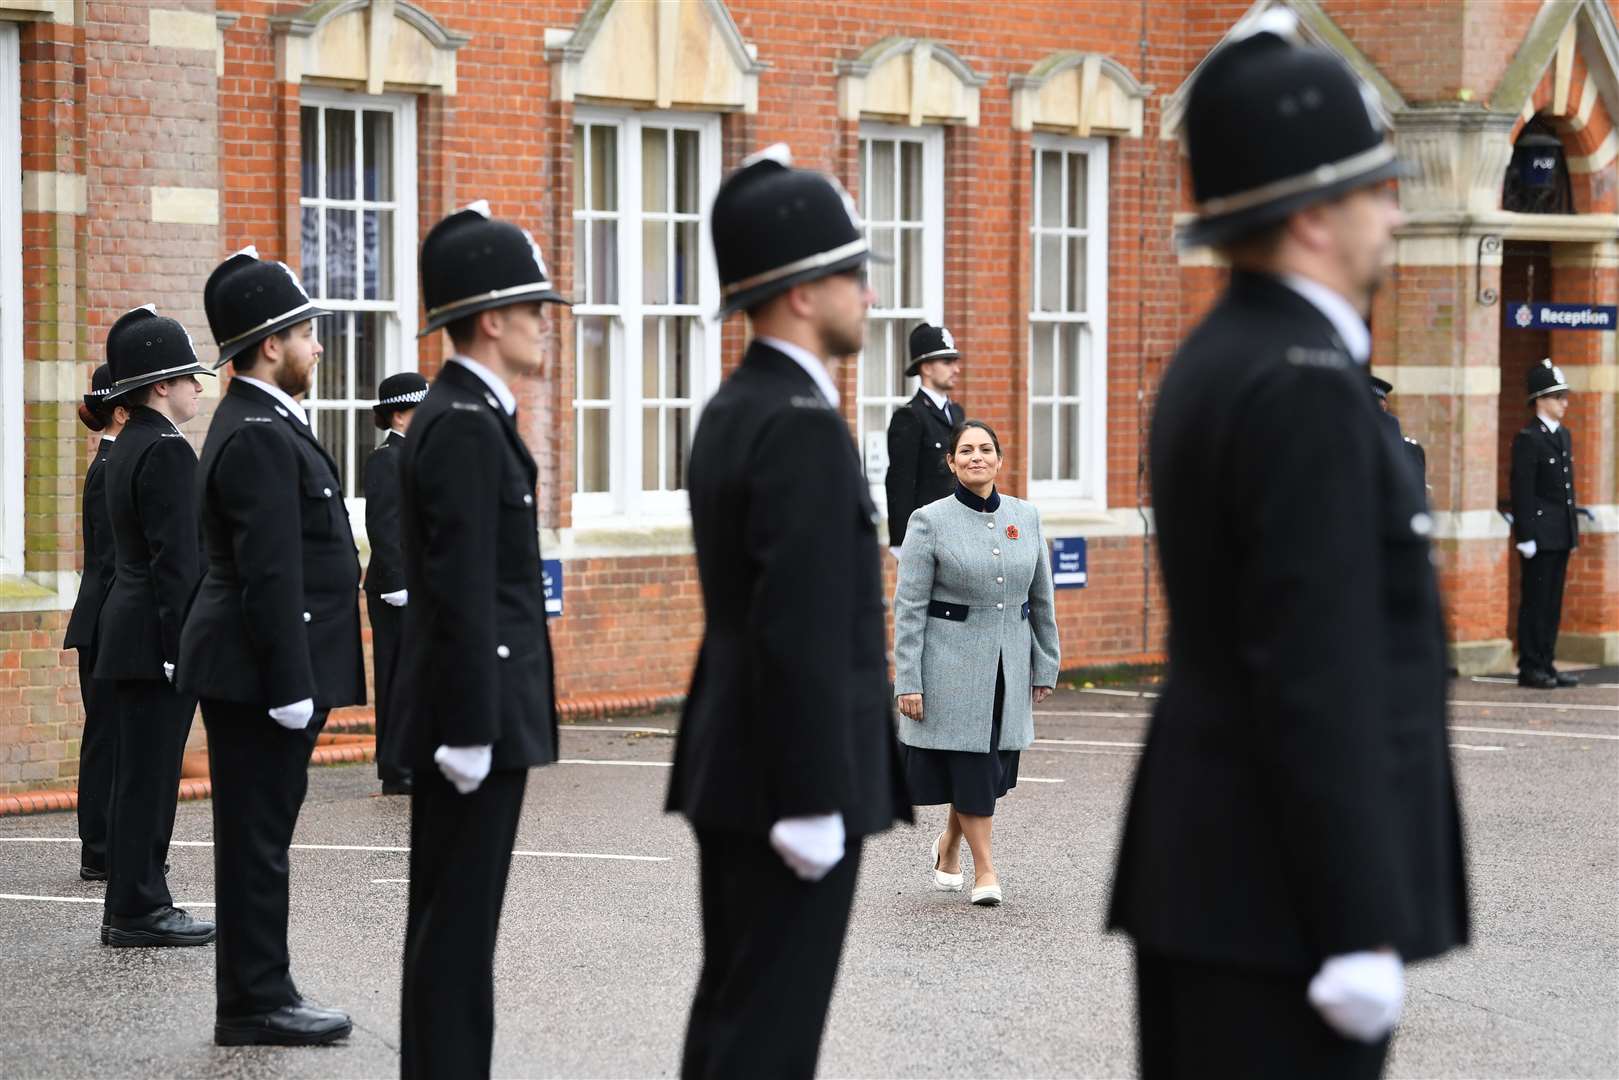 Home Secretary Priti Patel at a passing out parade for new recruits at Essex Police Headquarters in Chelmsford on Thursday (Stefan Rousseau/PA)